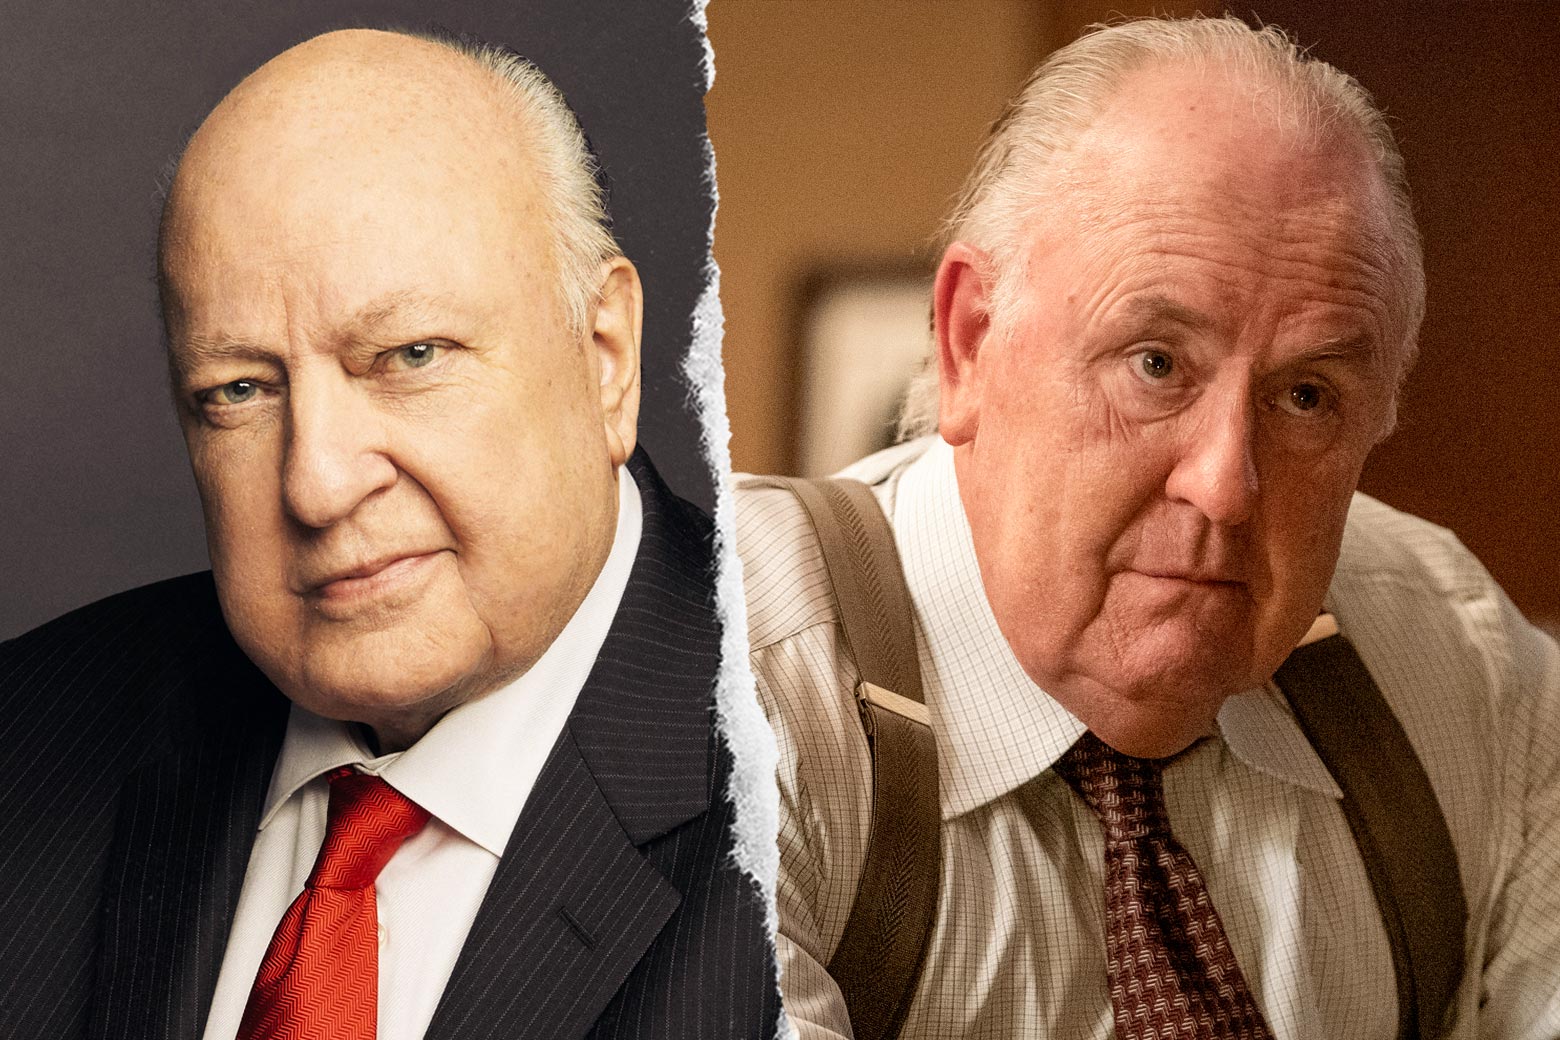 Roger Ailes, and John Lithgow as Roger Ailes